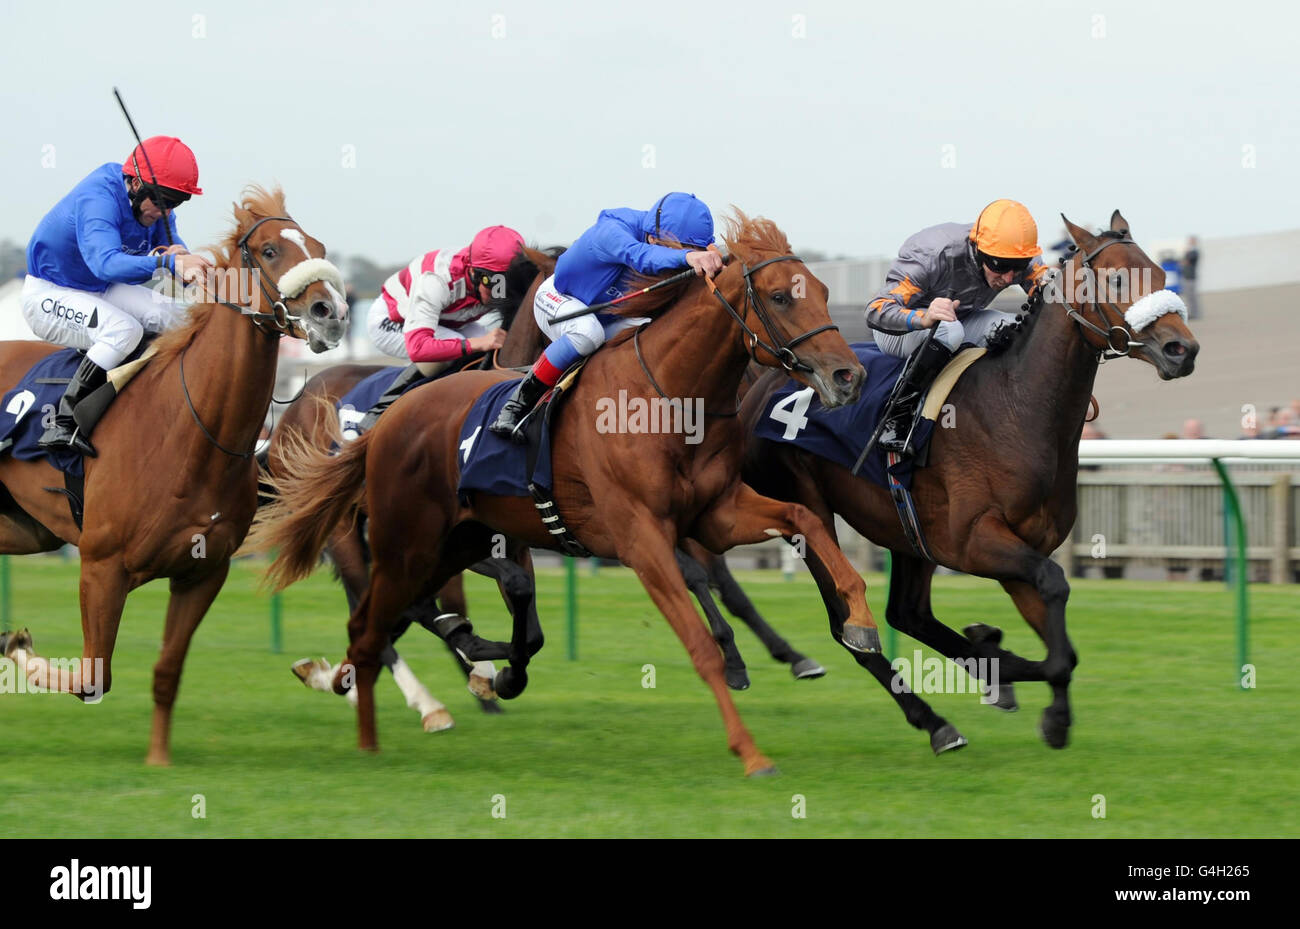 Dandy ridden by Jimmy Fortune (right) goes on to win the E.B.F. Zamindar Maiden Stakes during The Cambridgeshire Meeting at Newmarket Racecourse, Newmarket. Stock Photo